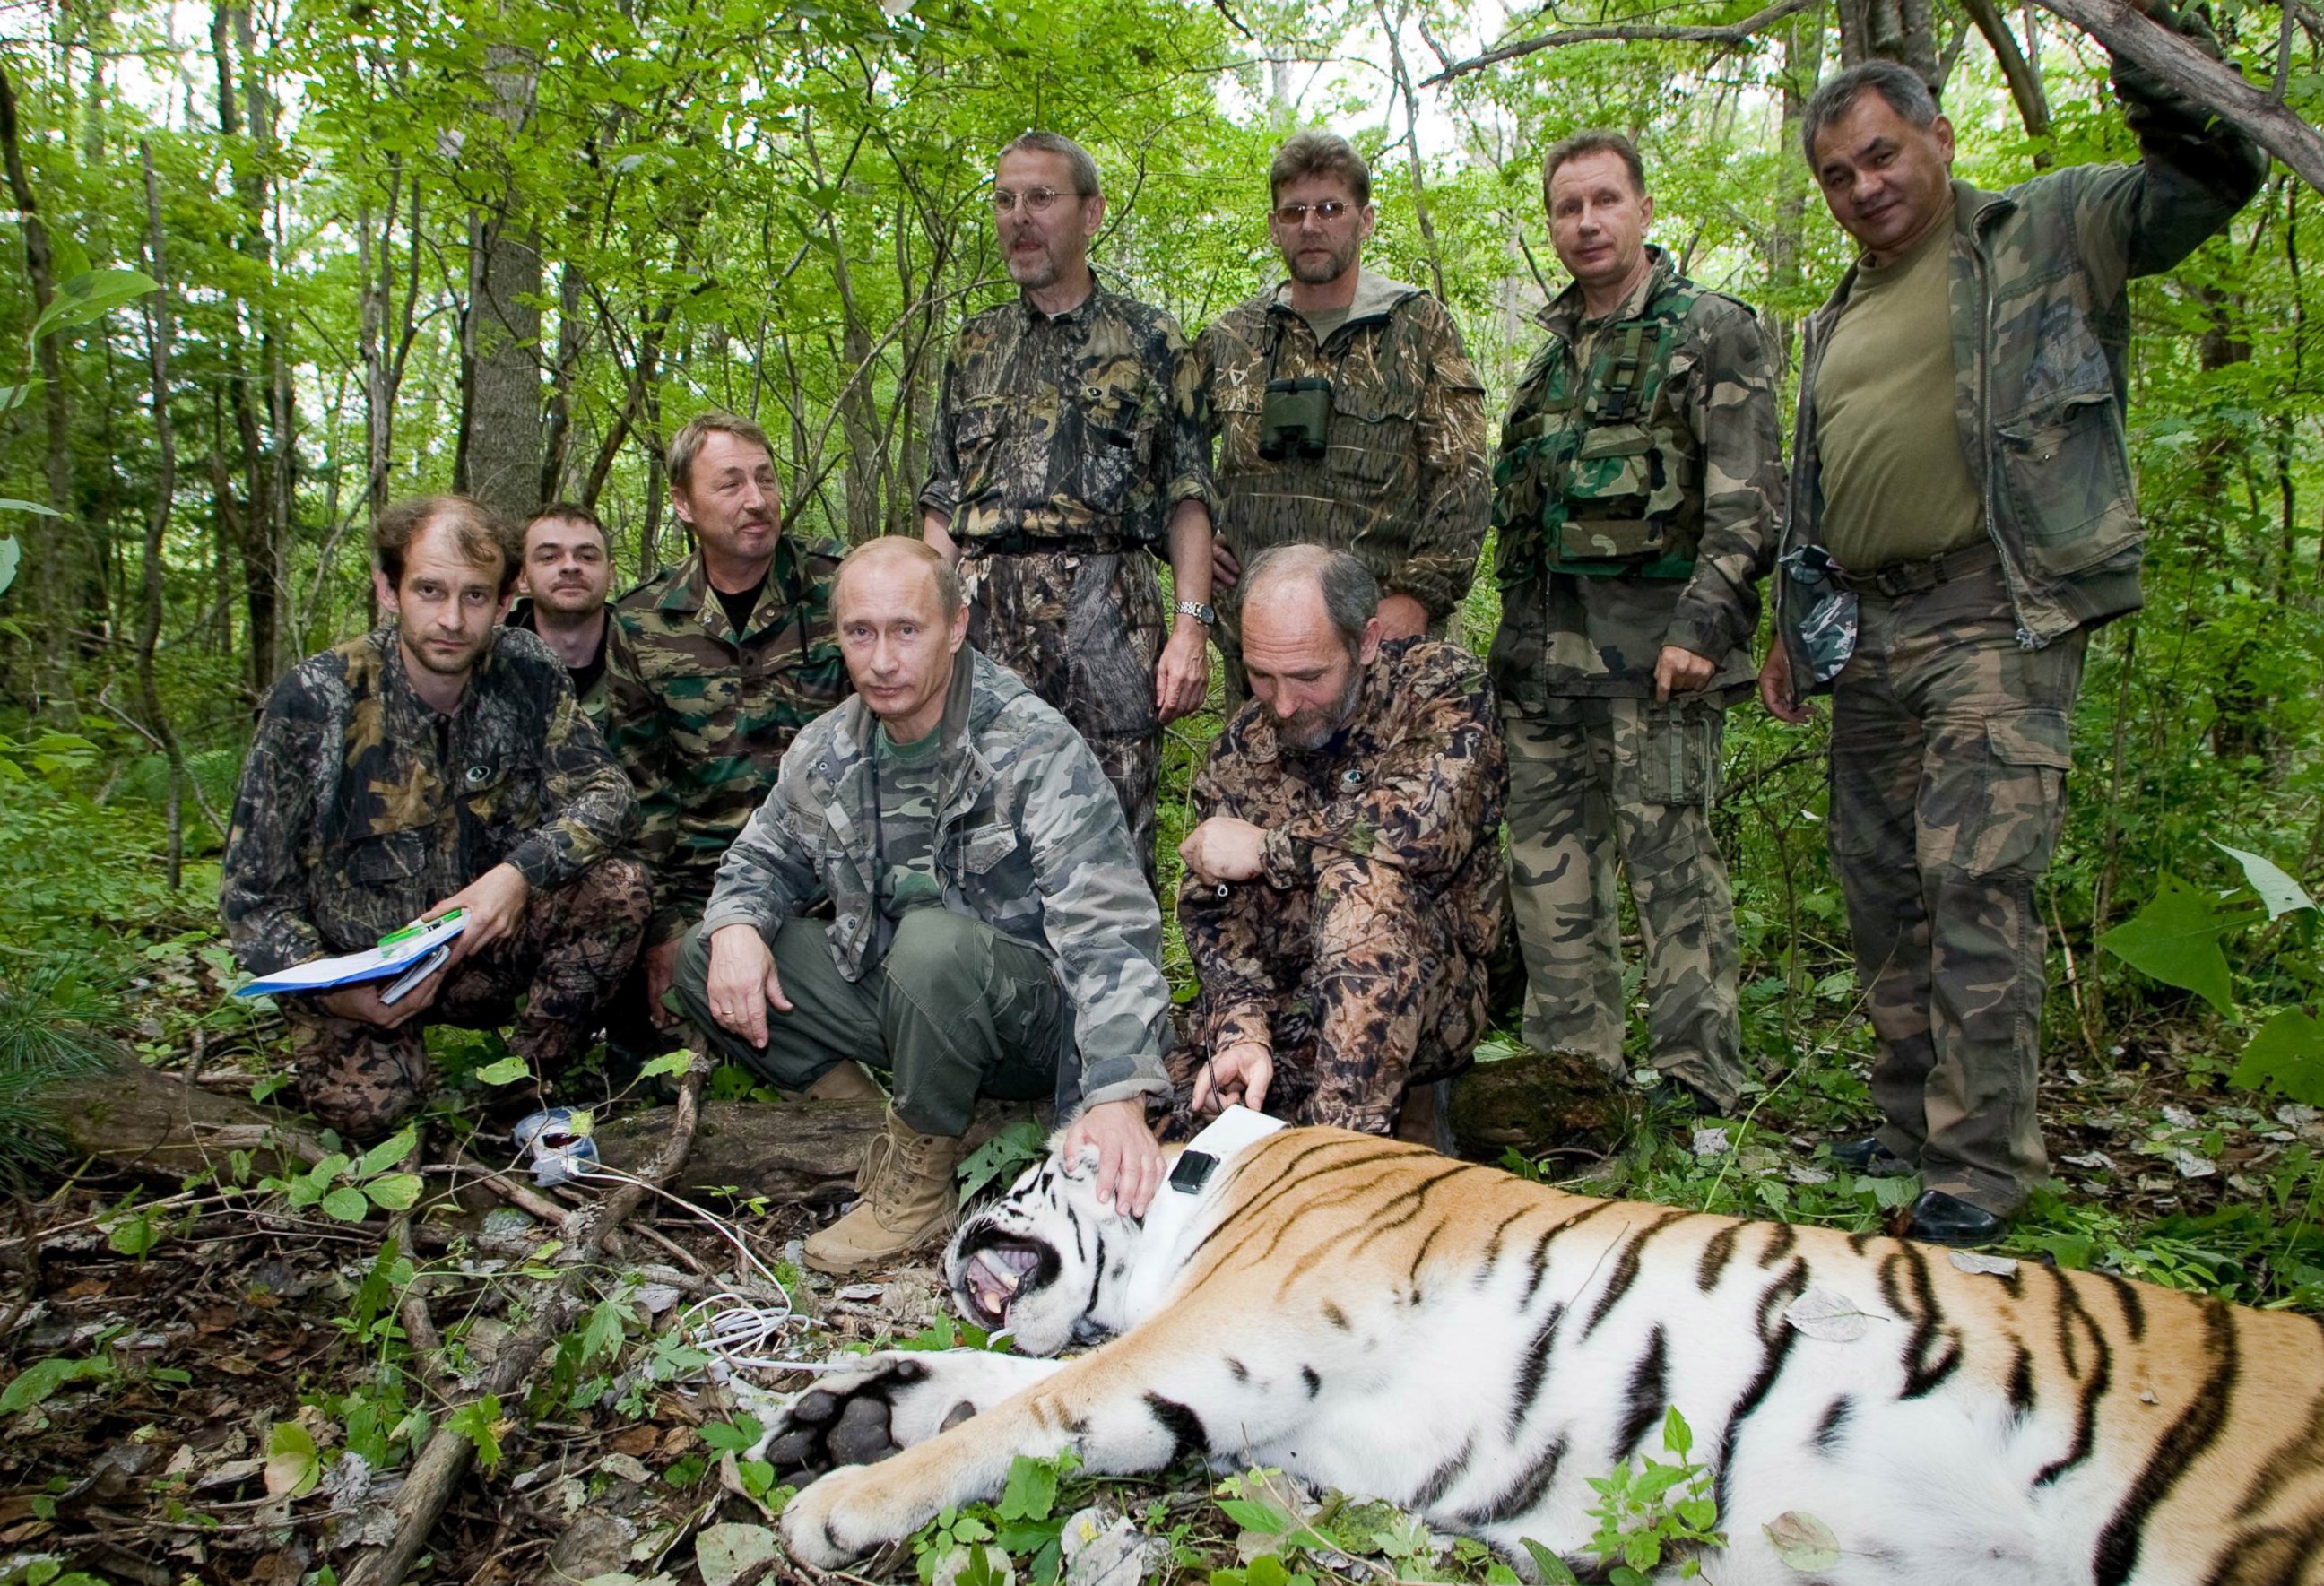 PHOTO: Vladimir Putin is seen in this undated file photo tagging a Siberian Tiger while visiting the Barabash tiger reserve, in eastern Siberia in the Amur Region of the Russian Federation.  